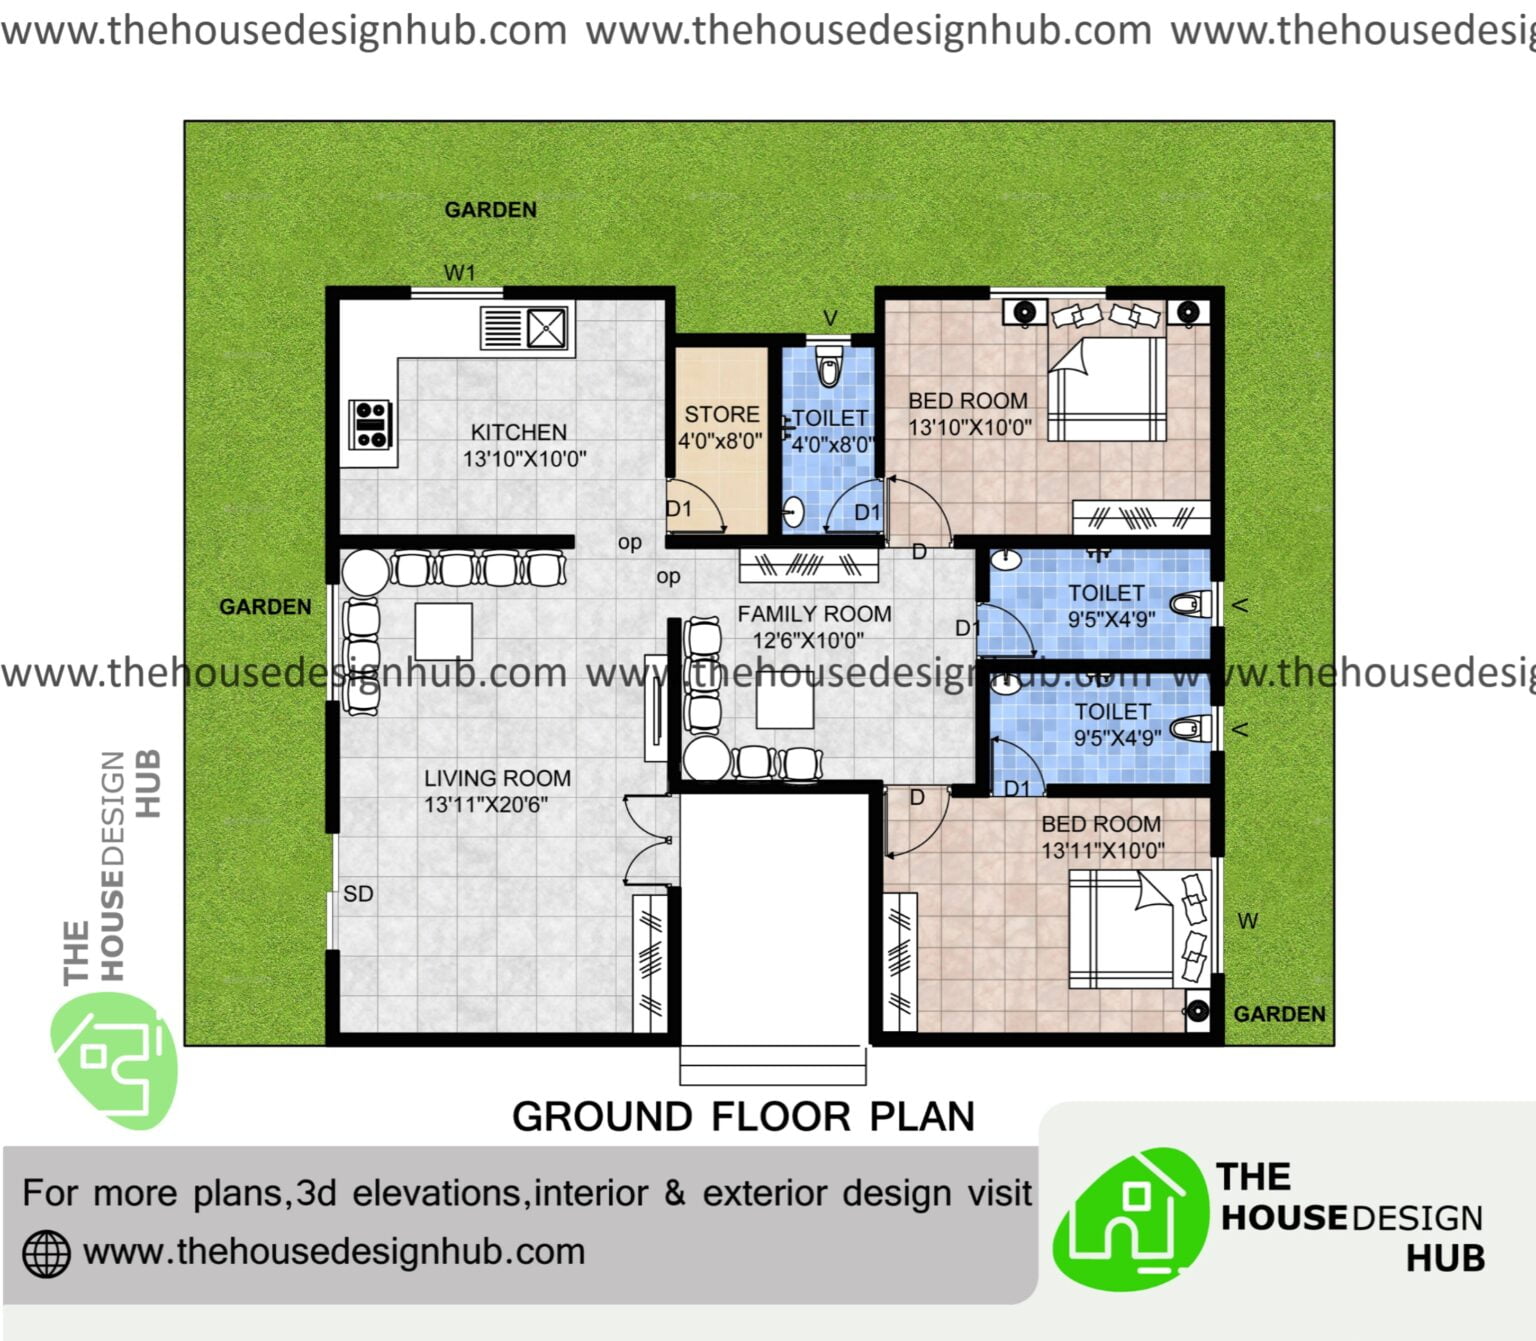 37 X 32 Ft 2 BHK House Plan In 1200 Sq Ft | The House Design Hub